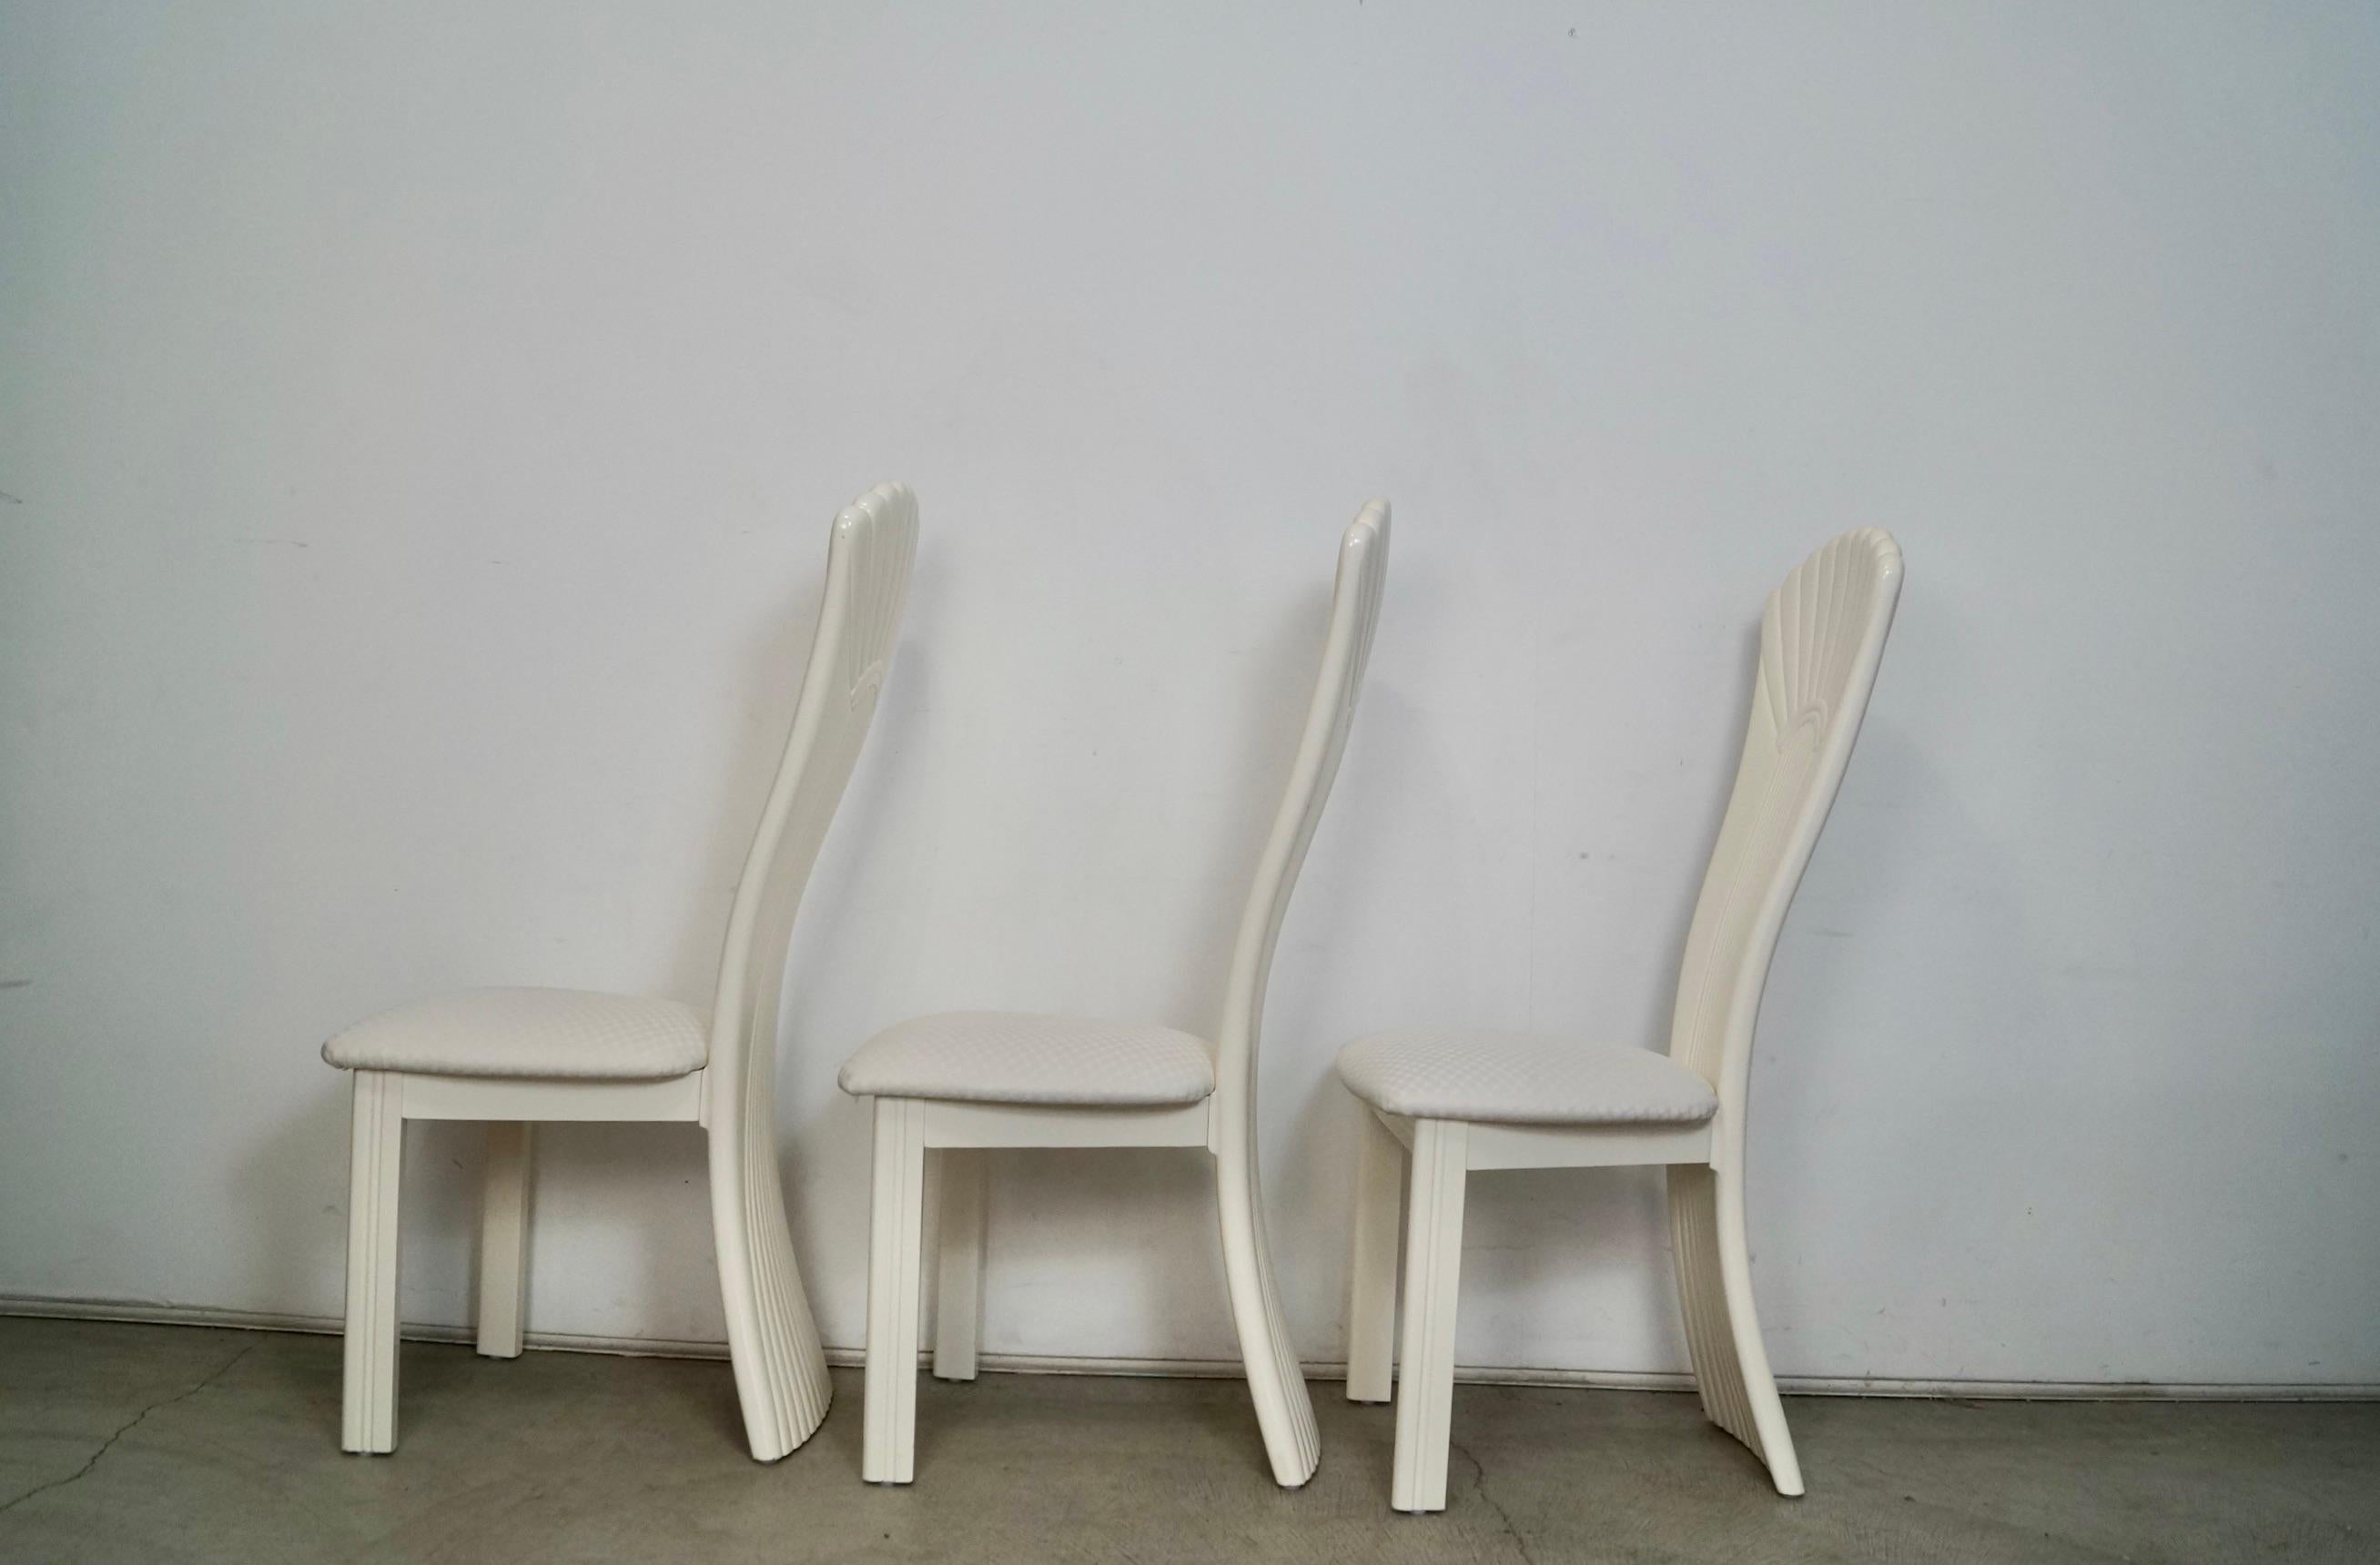 Lacquered 1980's Italian Postmodern Art Deco Najarian Dining Chairs - Set of 3 For Sale